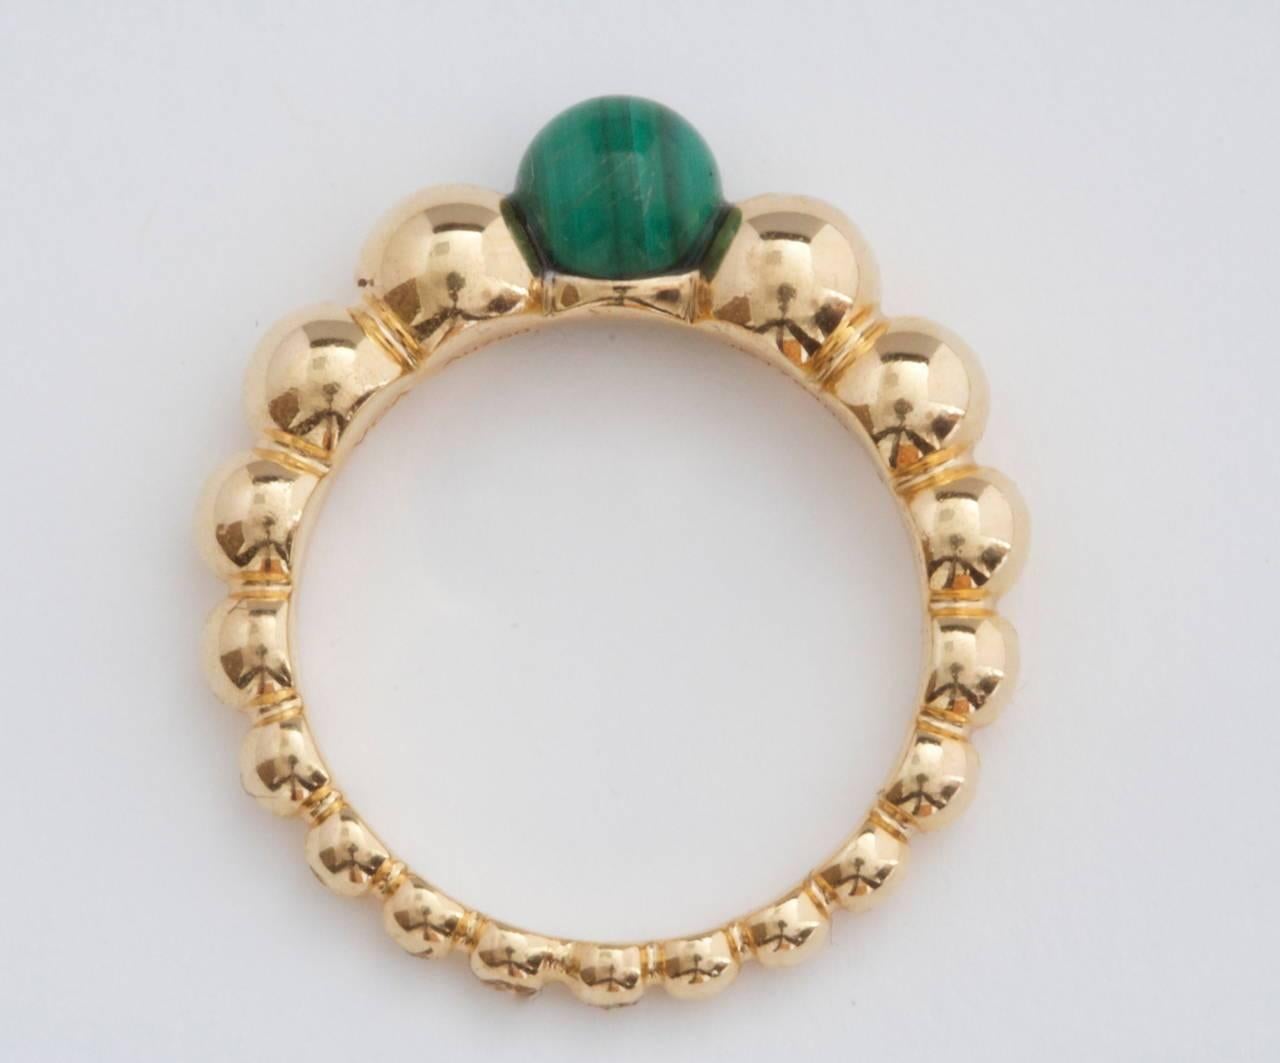 Van Cleef & Arpels, a long rich history of trend setting fashion that is still relevant today. Fashioned with a lovely multi hued green bead of malachite that is nicely complemented by descending beads of 18k yellow gold. Signed VCA and numbered. 